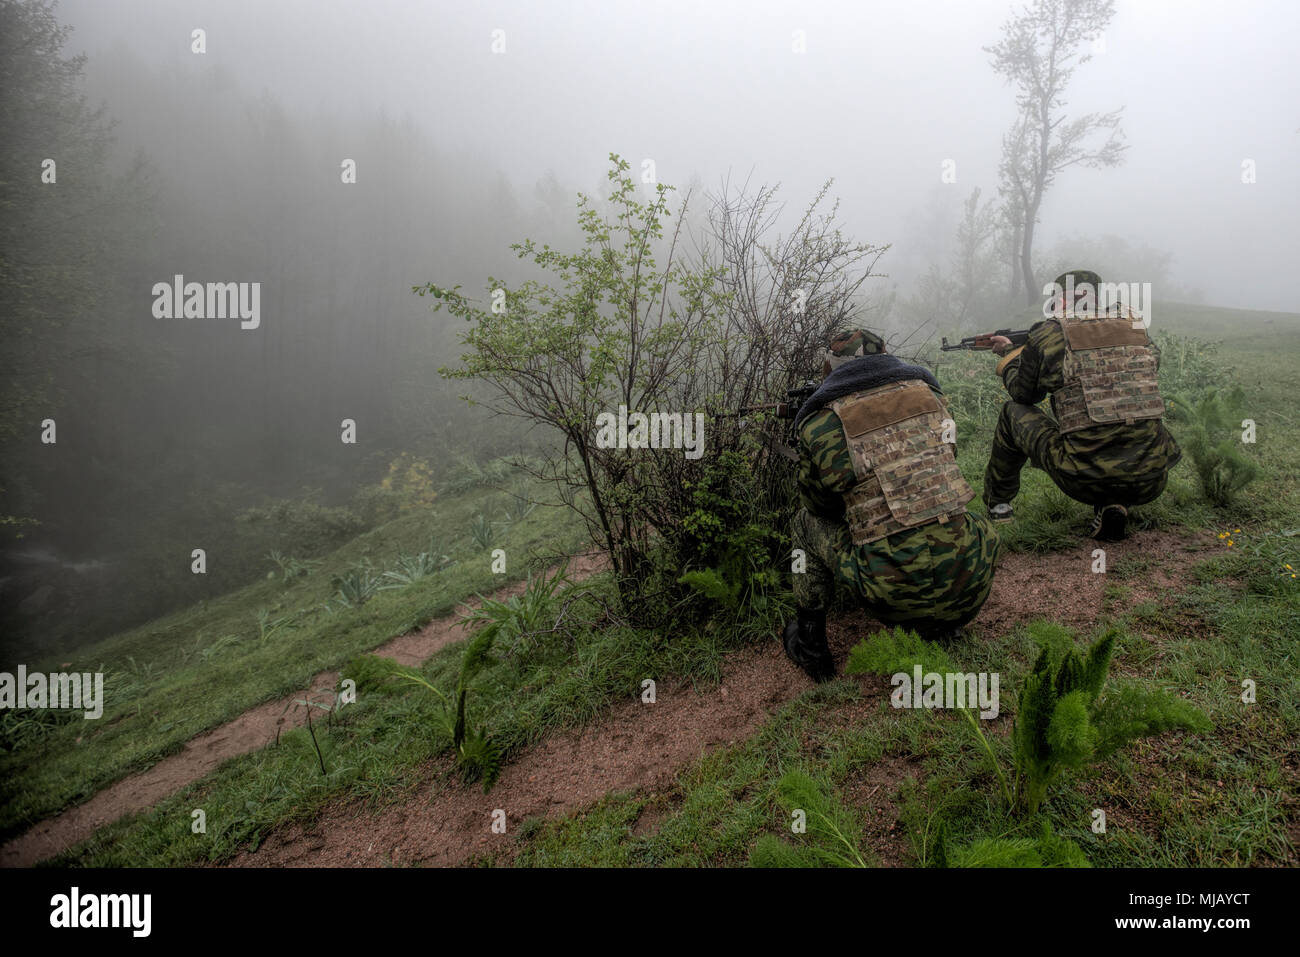 A Tajik sniper and his spotter look through the fog during a simulated ambush at a mountain training camp outside of Dushanbe, Tajikistan, April 19, 2018. This information exchange was part of a larger military-to-military engagement taking place with the Tajikistan Peacekeeping Battalion of the Mobile Forces and the 648th Military Engagement Team, Georgia Army National Guard, involving border security tactics and techniques. Stock Photo